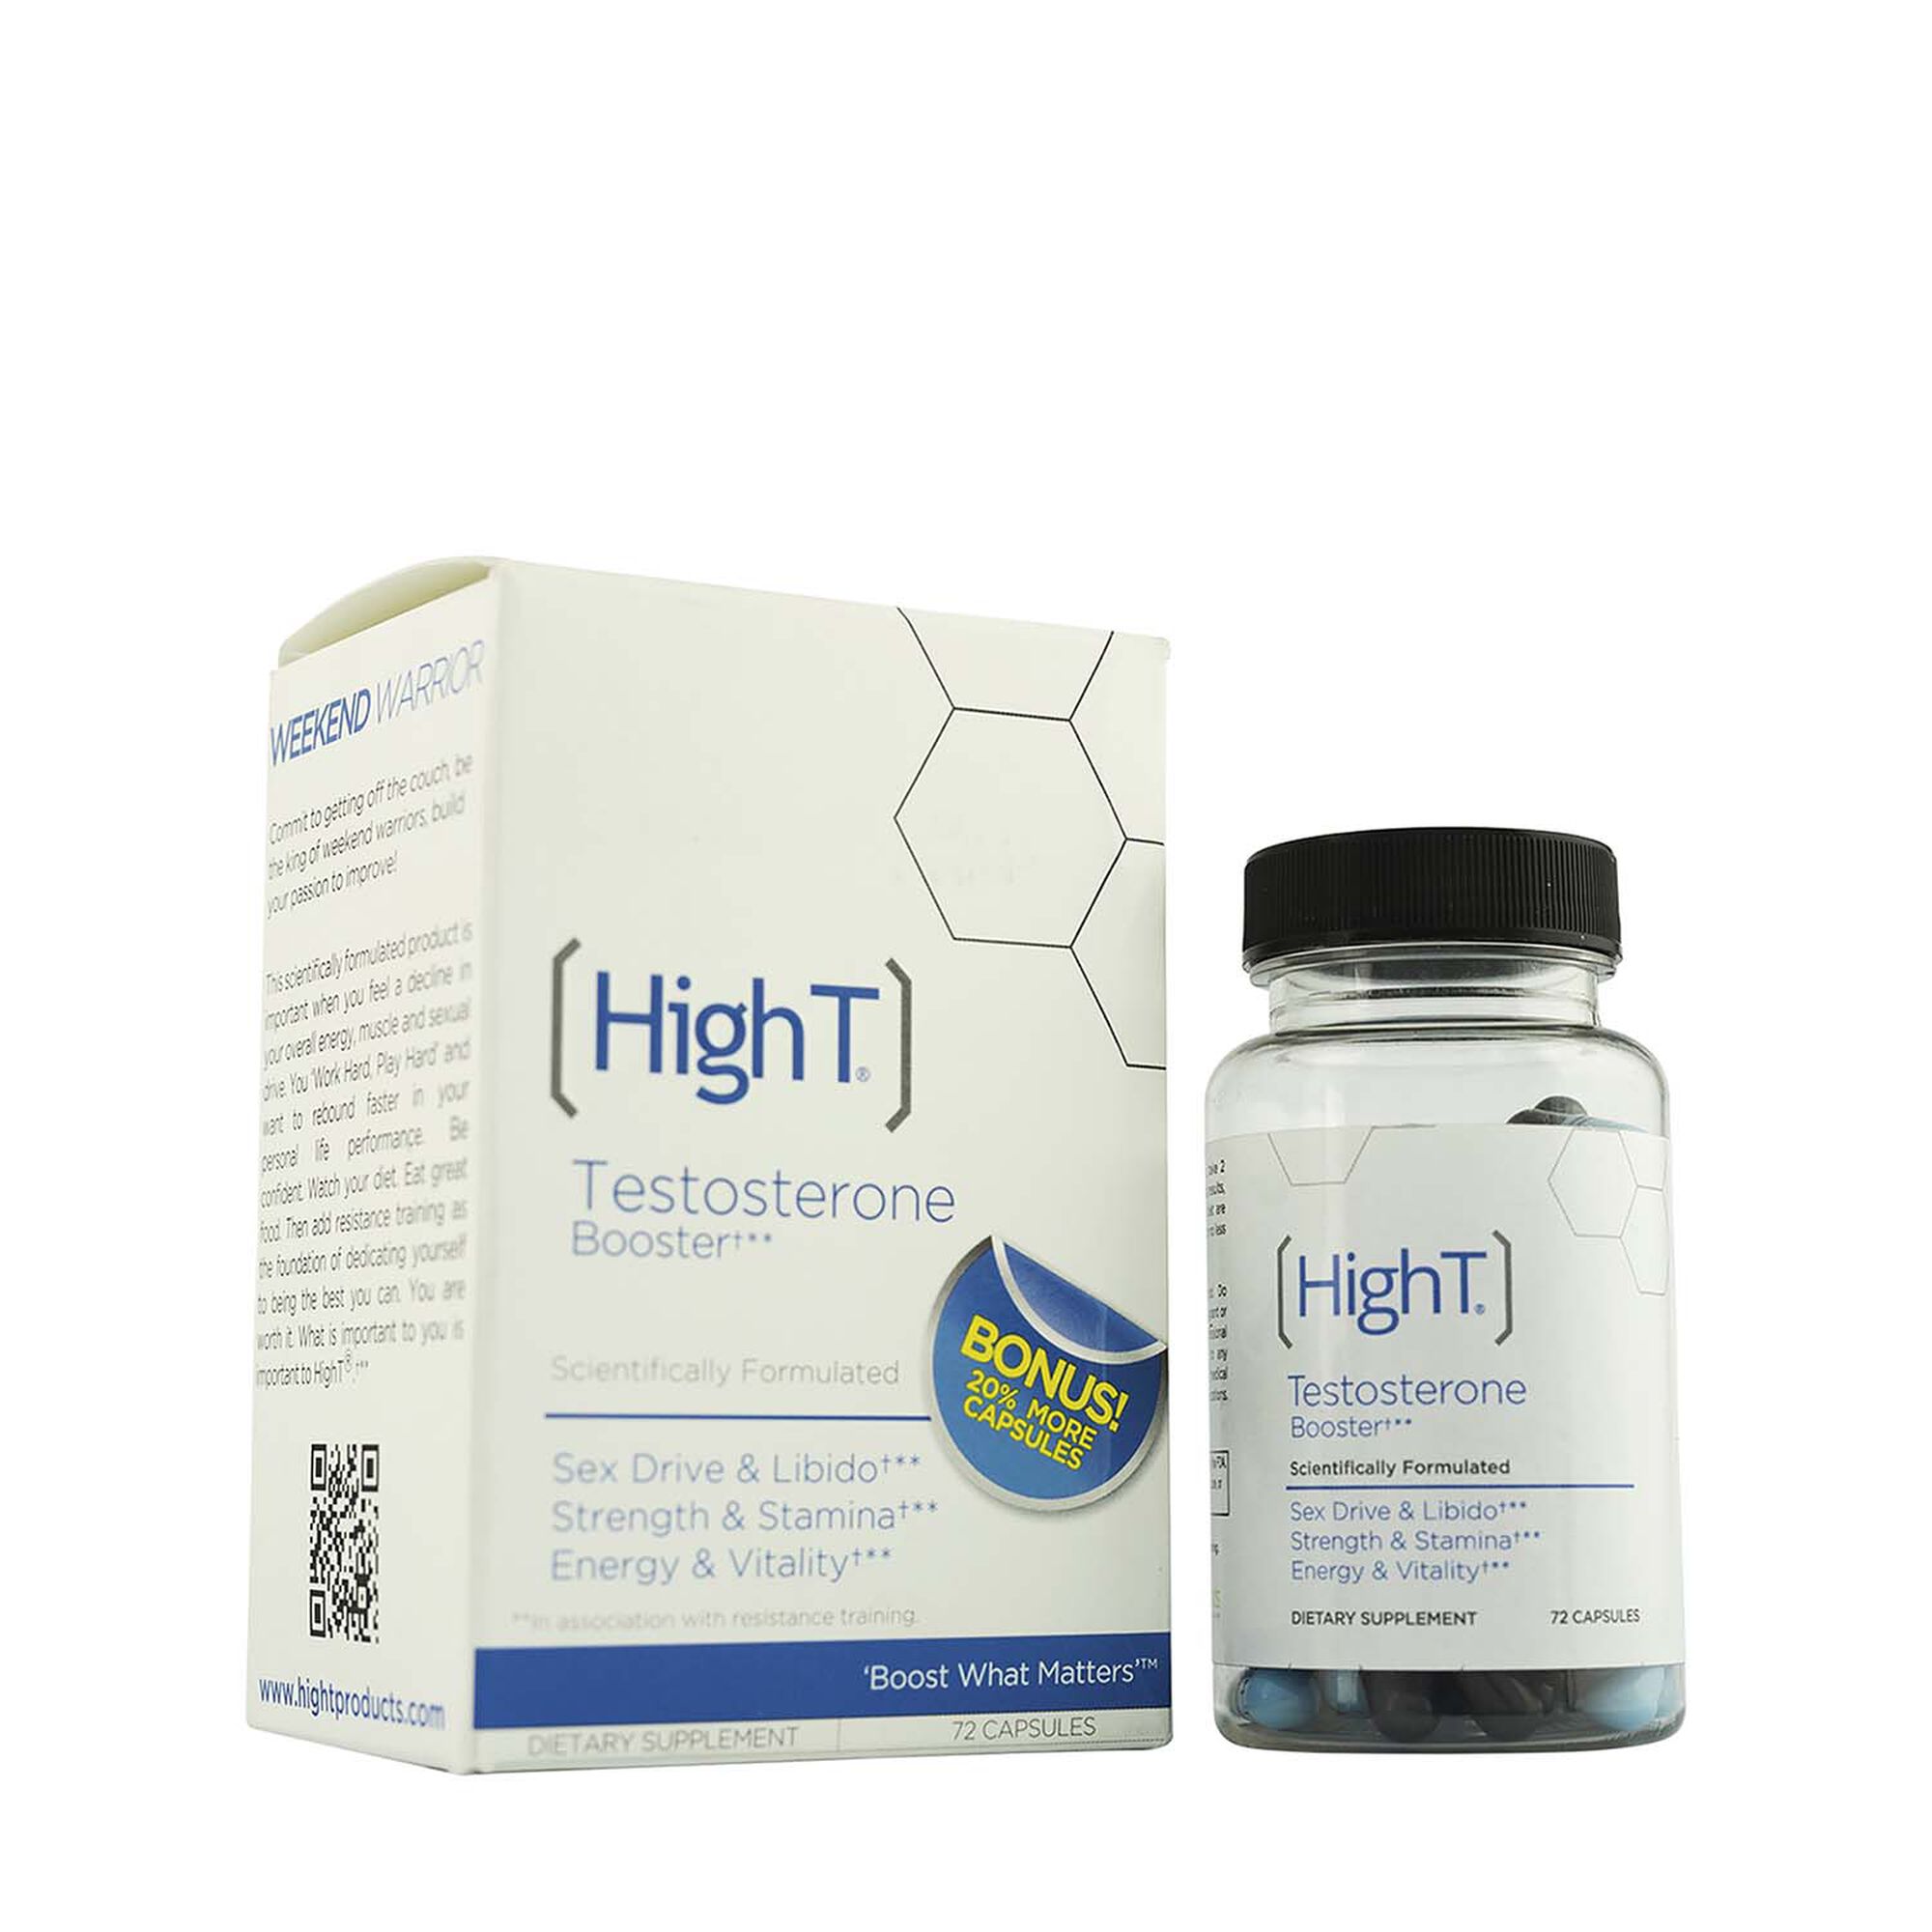 High T Testosterone Booster Reviews